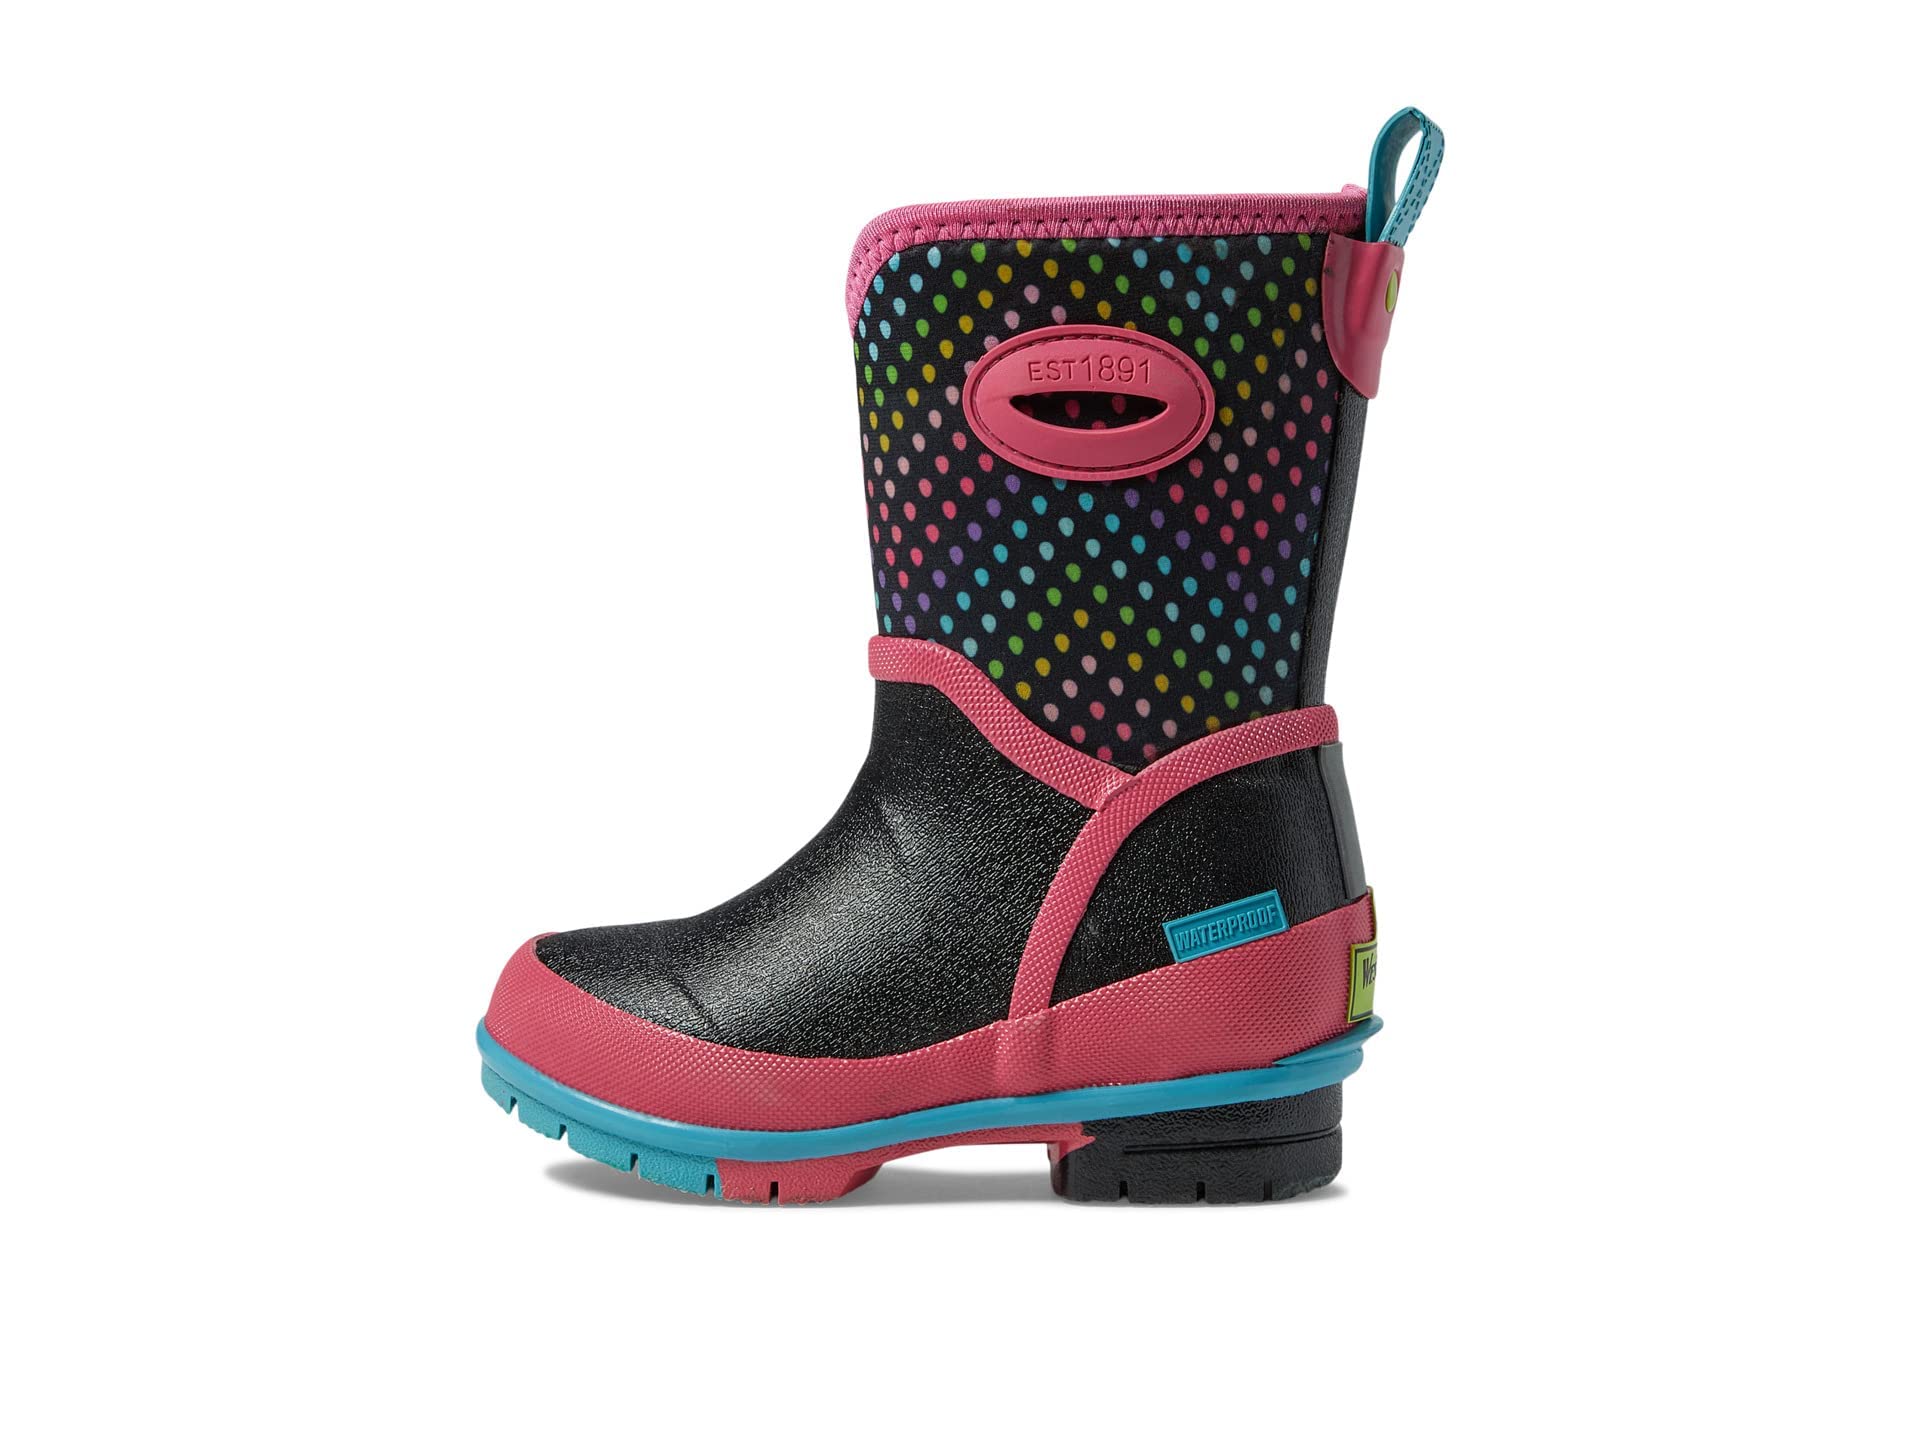 Western Chief Girl's Cold Rated Neoprene Boots (Toddler/Little Kid/Big Kid) Rainbow Wave 13 Little Kid M